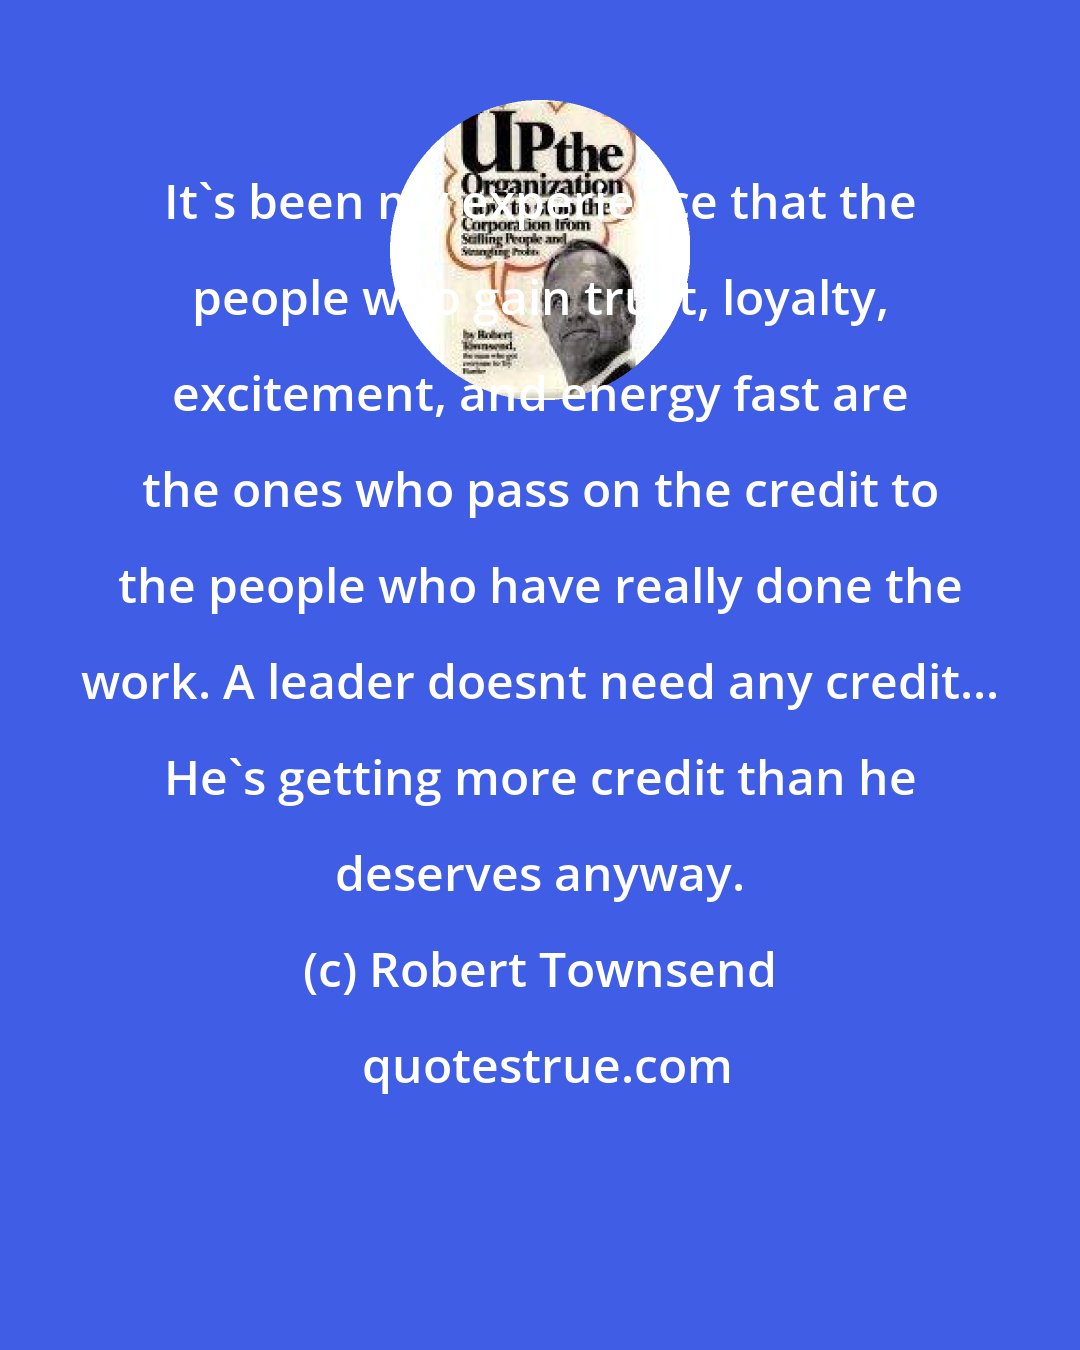 Robert Townsend: It's been my experience that the people who gain trust, loyalty, excitement, and energy fast are the ones who pass on the credit to the people who have really done the work. A leader doesnt need any credit... He's getting more credit than he deserves anyway.